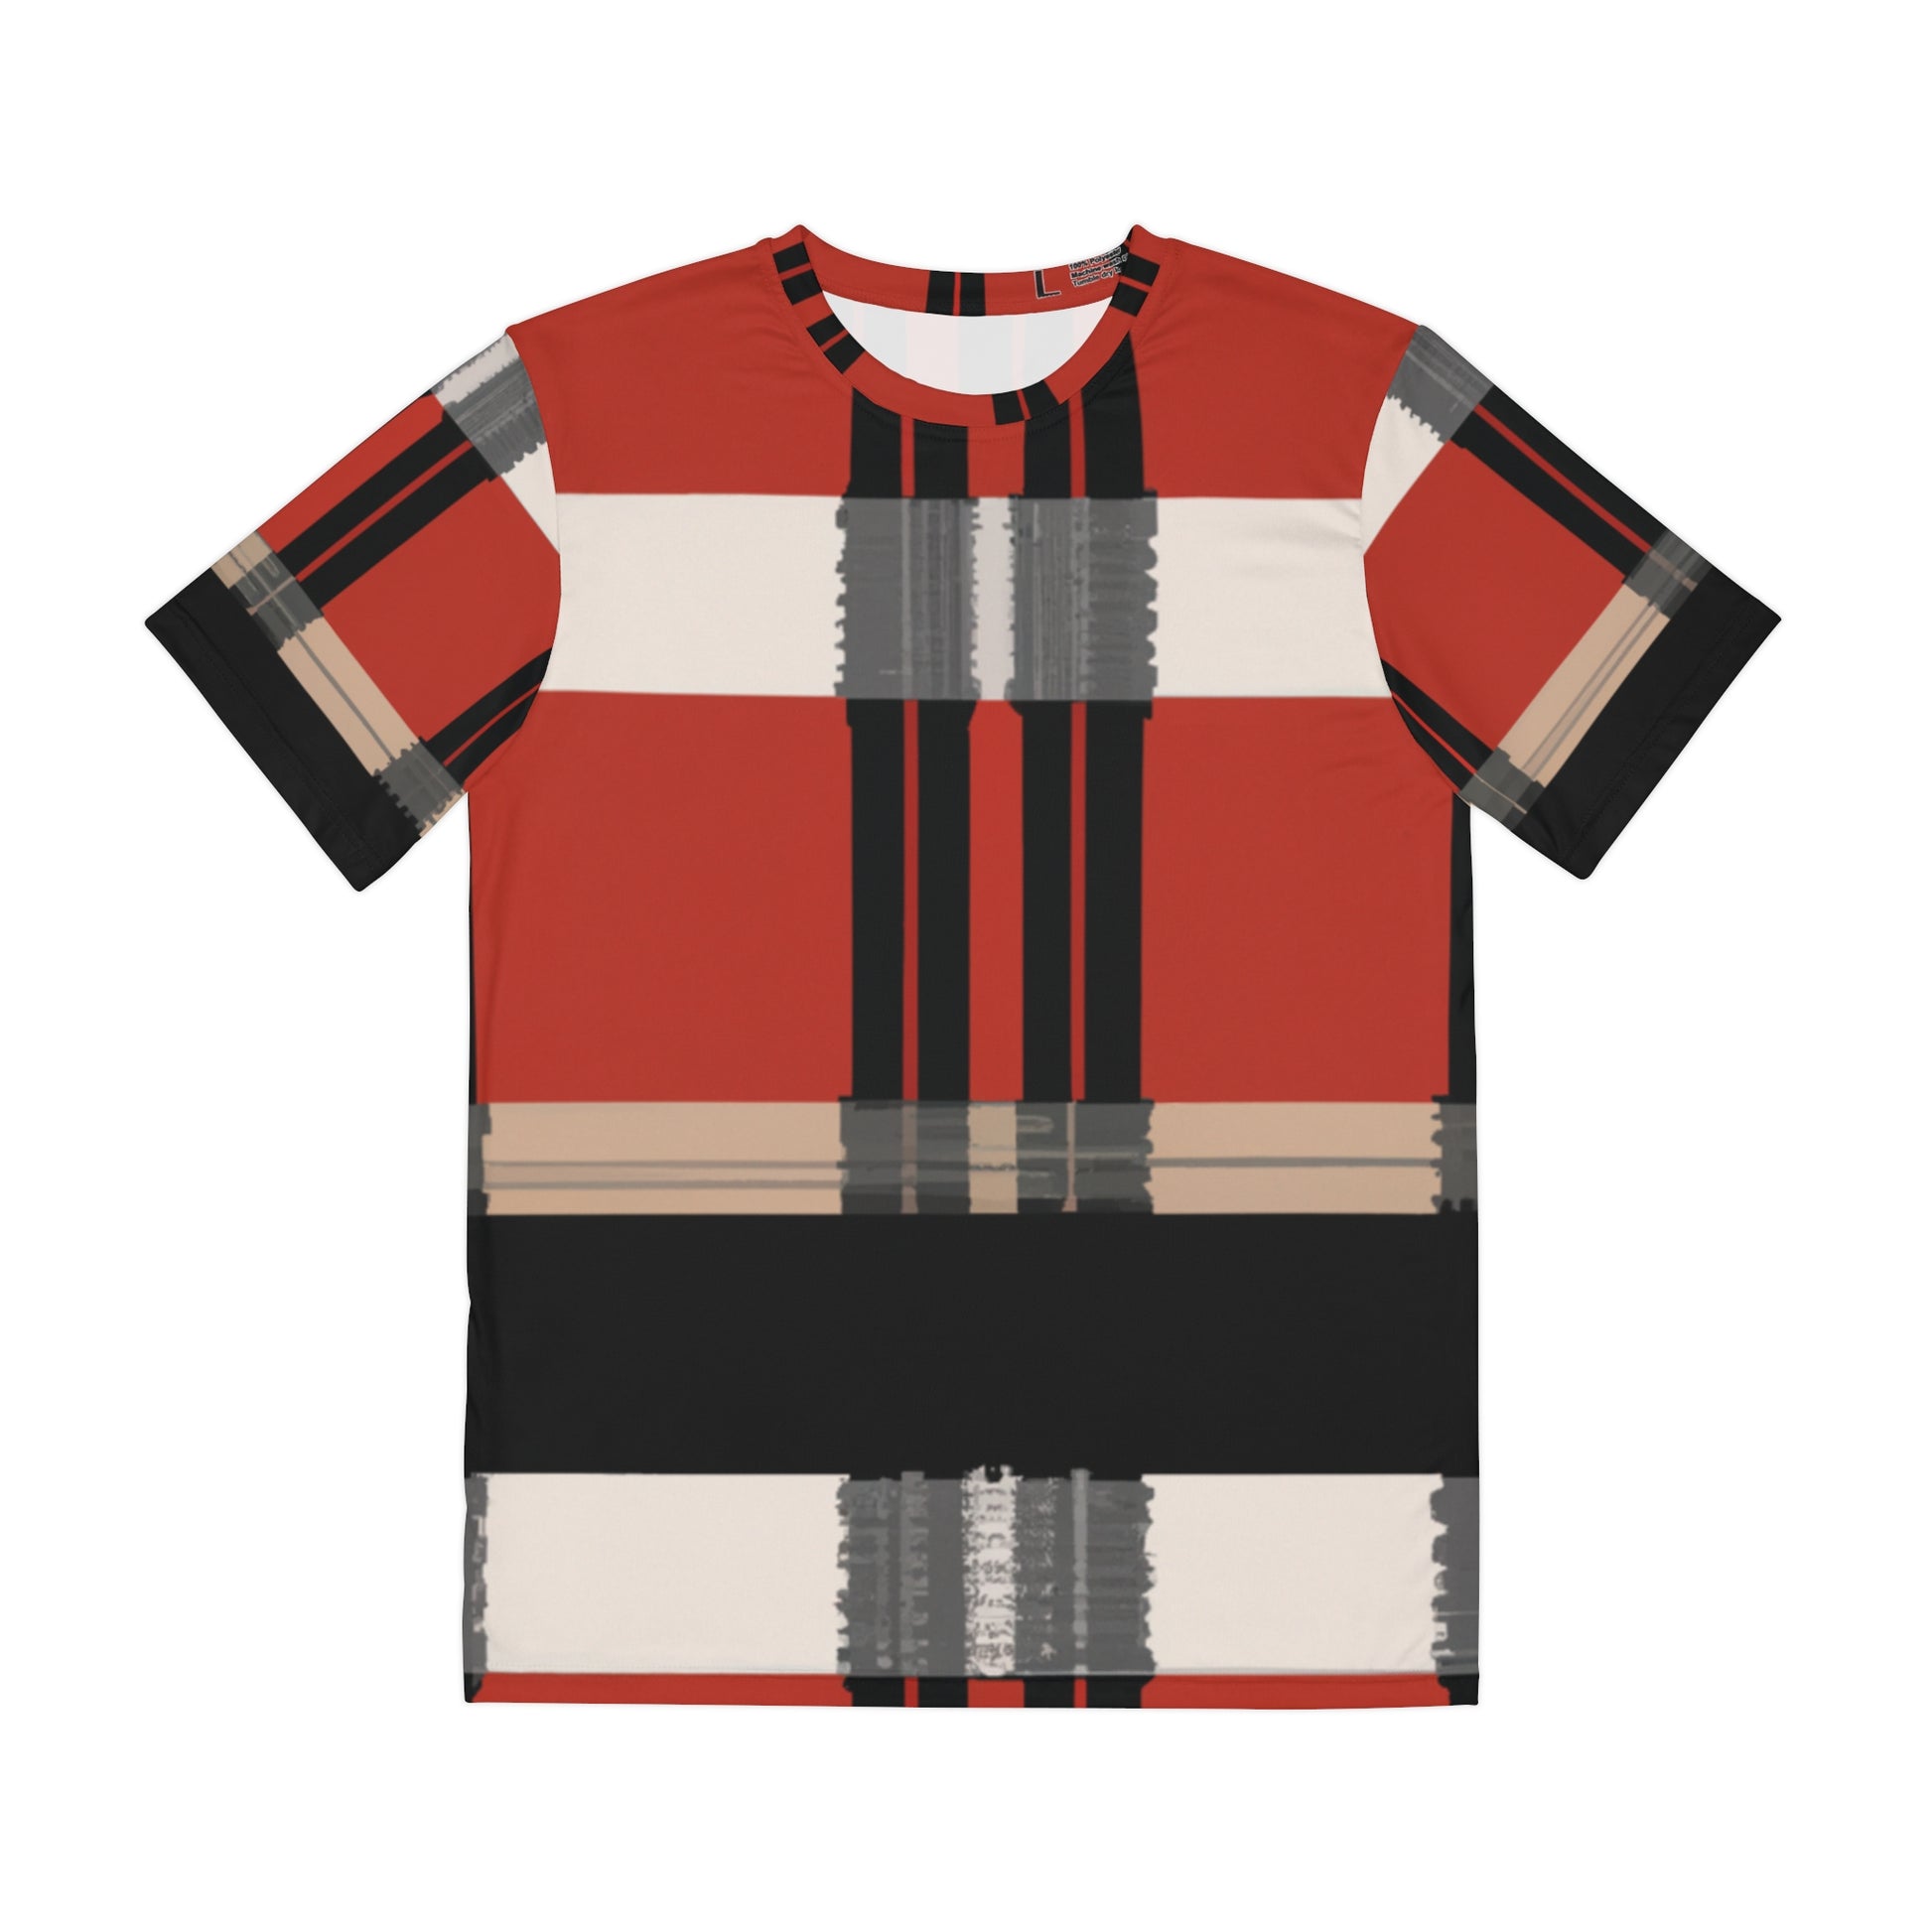 Front view of the Highland Cardinal Alba Tartan Crewneck Pullover All-Over Print Short-Sleeved Shirt red black beige plaid pattern 